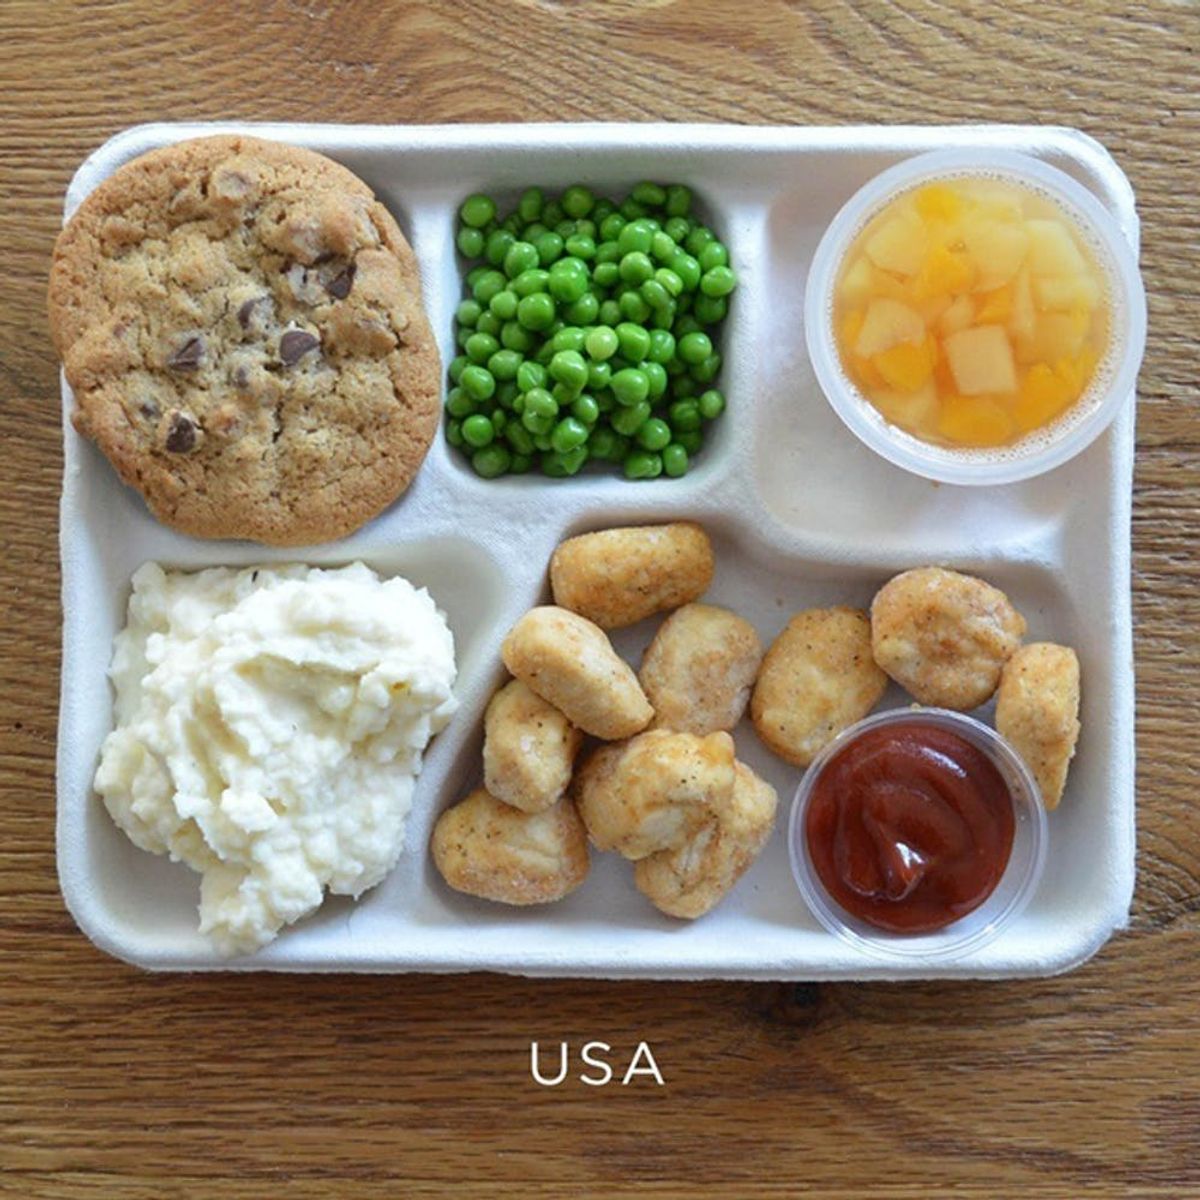 Photo Evidence That America Might Have the Worst School Lunches